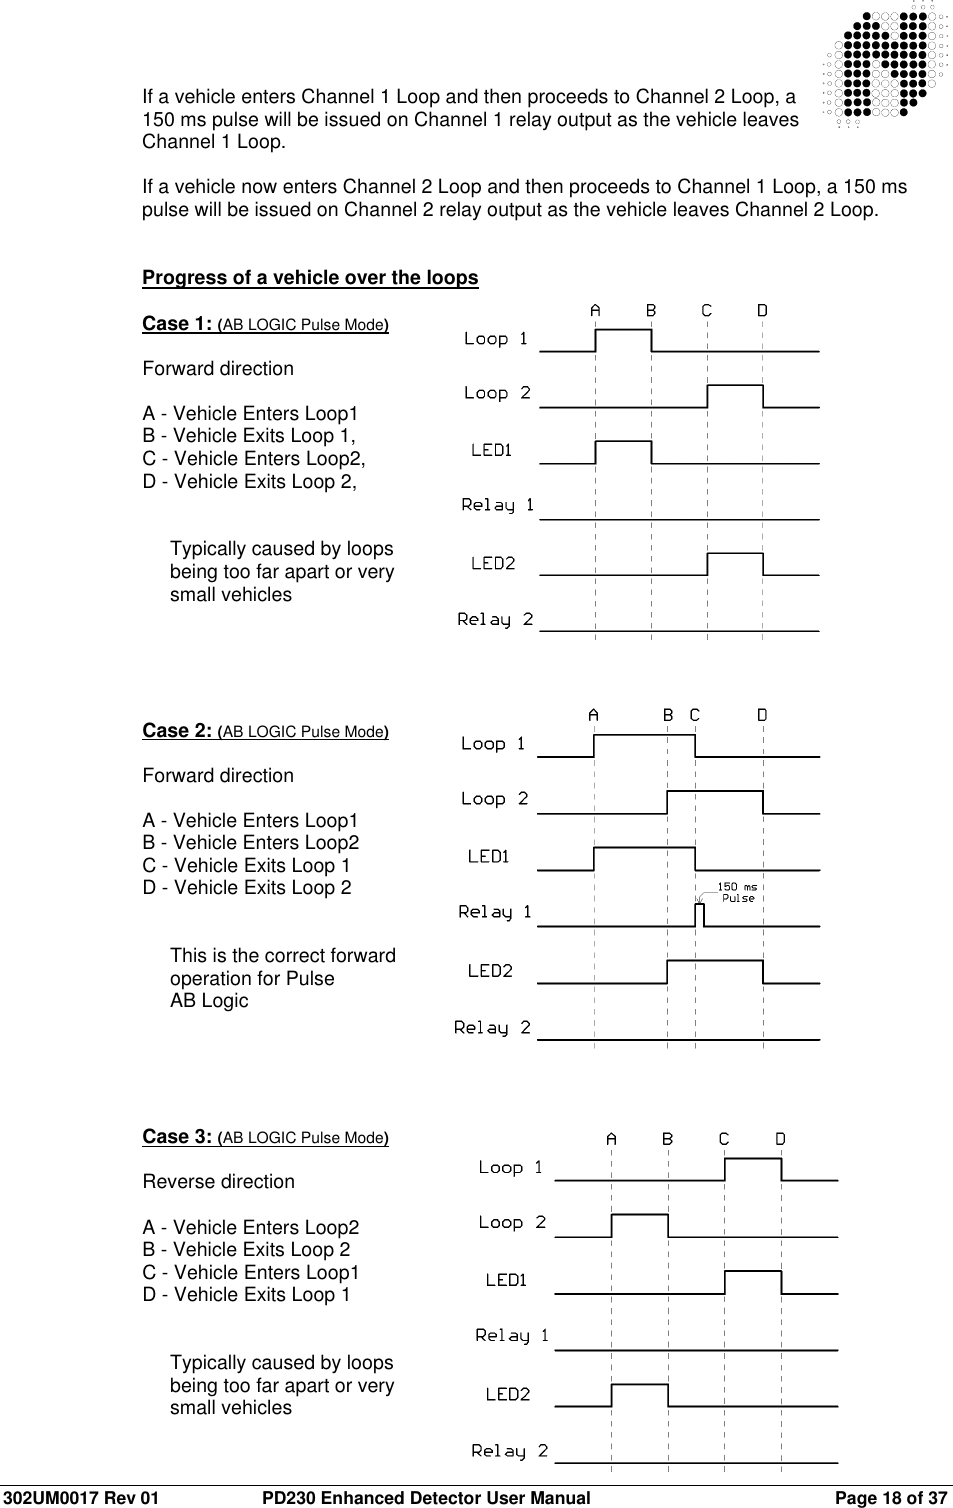  302UM0017 Rev 01  PD230 Enhanced Detector User Manual   Page 18 of 37   If a vehicle enters Channel 1 Loop and then proceeds to Channel 2 Loop, a 150 ms pulse will be issued on Channel 1 relay output as the vehicle leaves Channel 1 Loop.  If a vehicle now enters Channel 2 Loop and then proceeds to Channel 1 Loop, a 150 ms pulse will be issued on Channel 2 relay output as the vehicle leaves Channel 2 Loop.   Progress of a vehicle over the loops  Case 1: (AB LOGIC Pulse Mode)  Forward direction  A - Vehicle Enters Loop1 B - Vehicle Exits Loop 1, C - Vehicle Enters Loop2,  D - Vehicle Exits Loop 2,   Typically caused by loops  being too far apart or very  small vehicles      Case 2: (AB LOGIC Pulse Mode)  Forward direction  A - Vehicle Enters Loop1 B - Vehicle Enters Loop2 C - Vehicle Exits Loop 1 D - Vehicle Exits Loop 2   This is the correct forward operation for Pulse  AB Logic      Case 3: (AB LOGIC Pulse Mode)  Reverse direction  A - Vehicle Enters Loop2 B - Vehicle Exits Loop 2 C - Vehicle Enters Loop1 D - Vehicle Exits Loop 1   Typically caused by loops  being too far apart or very  small vehicles  